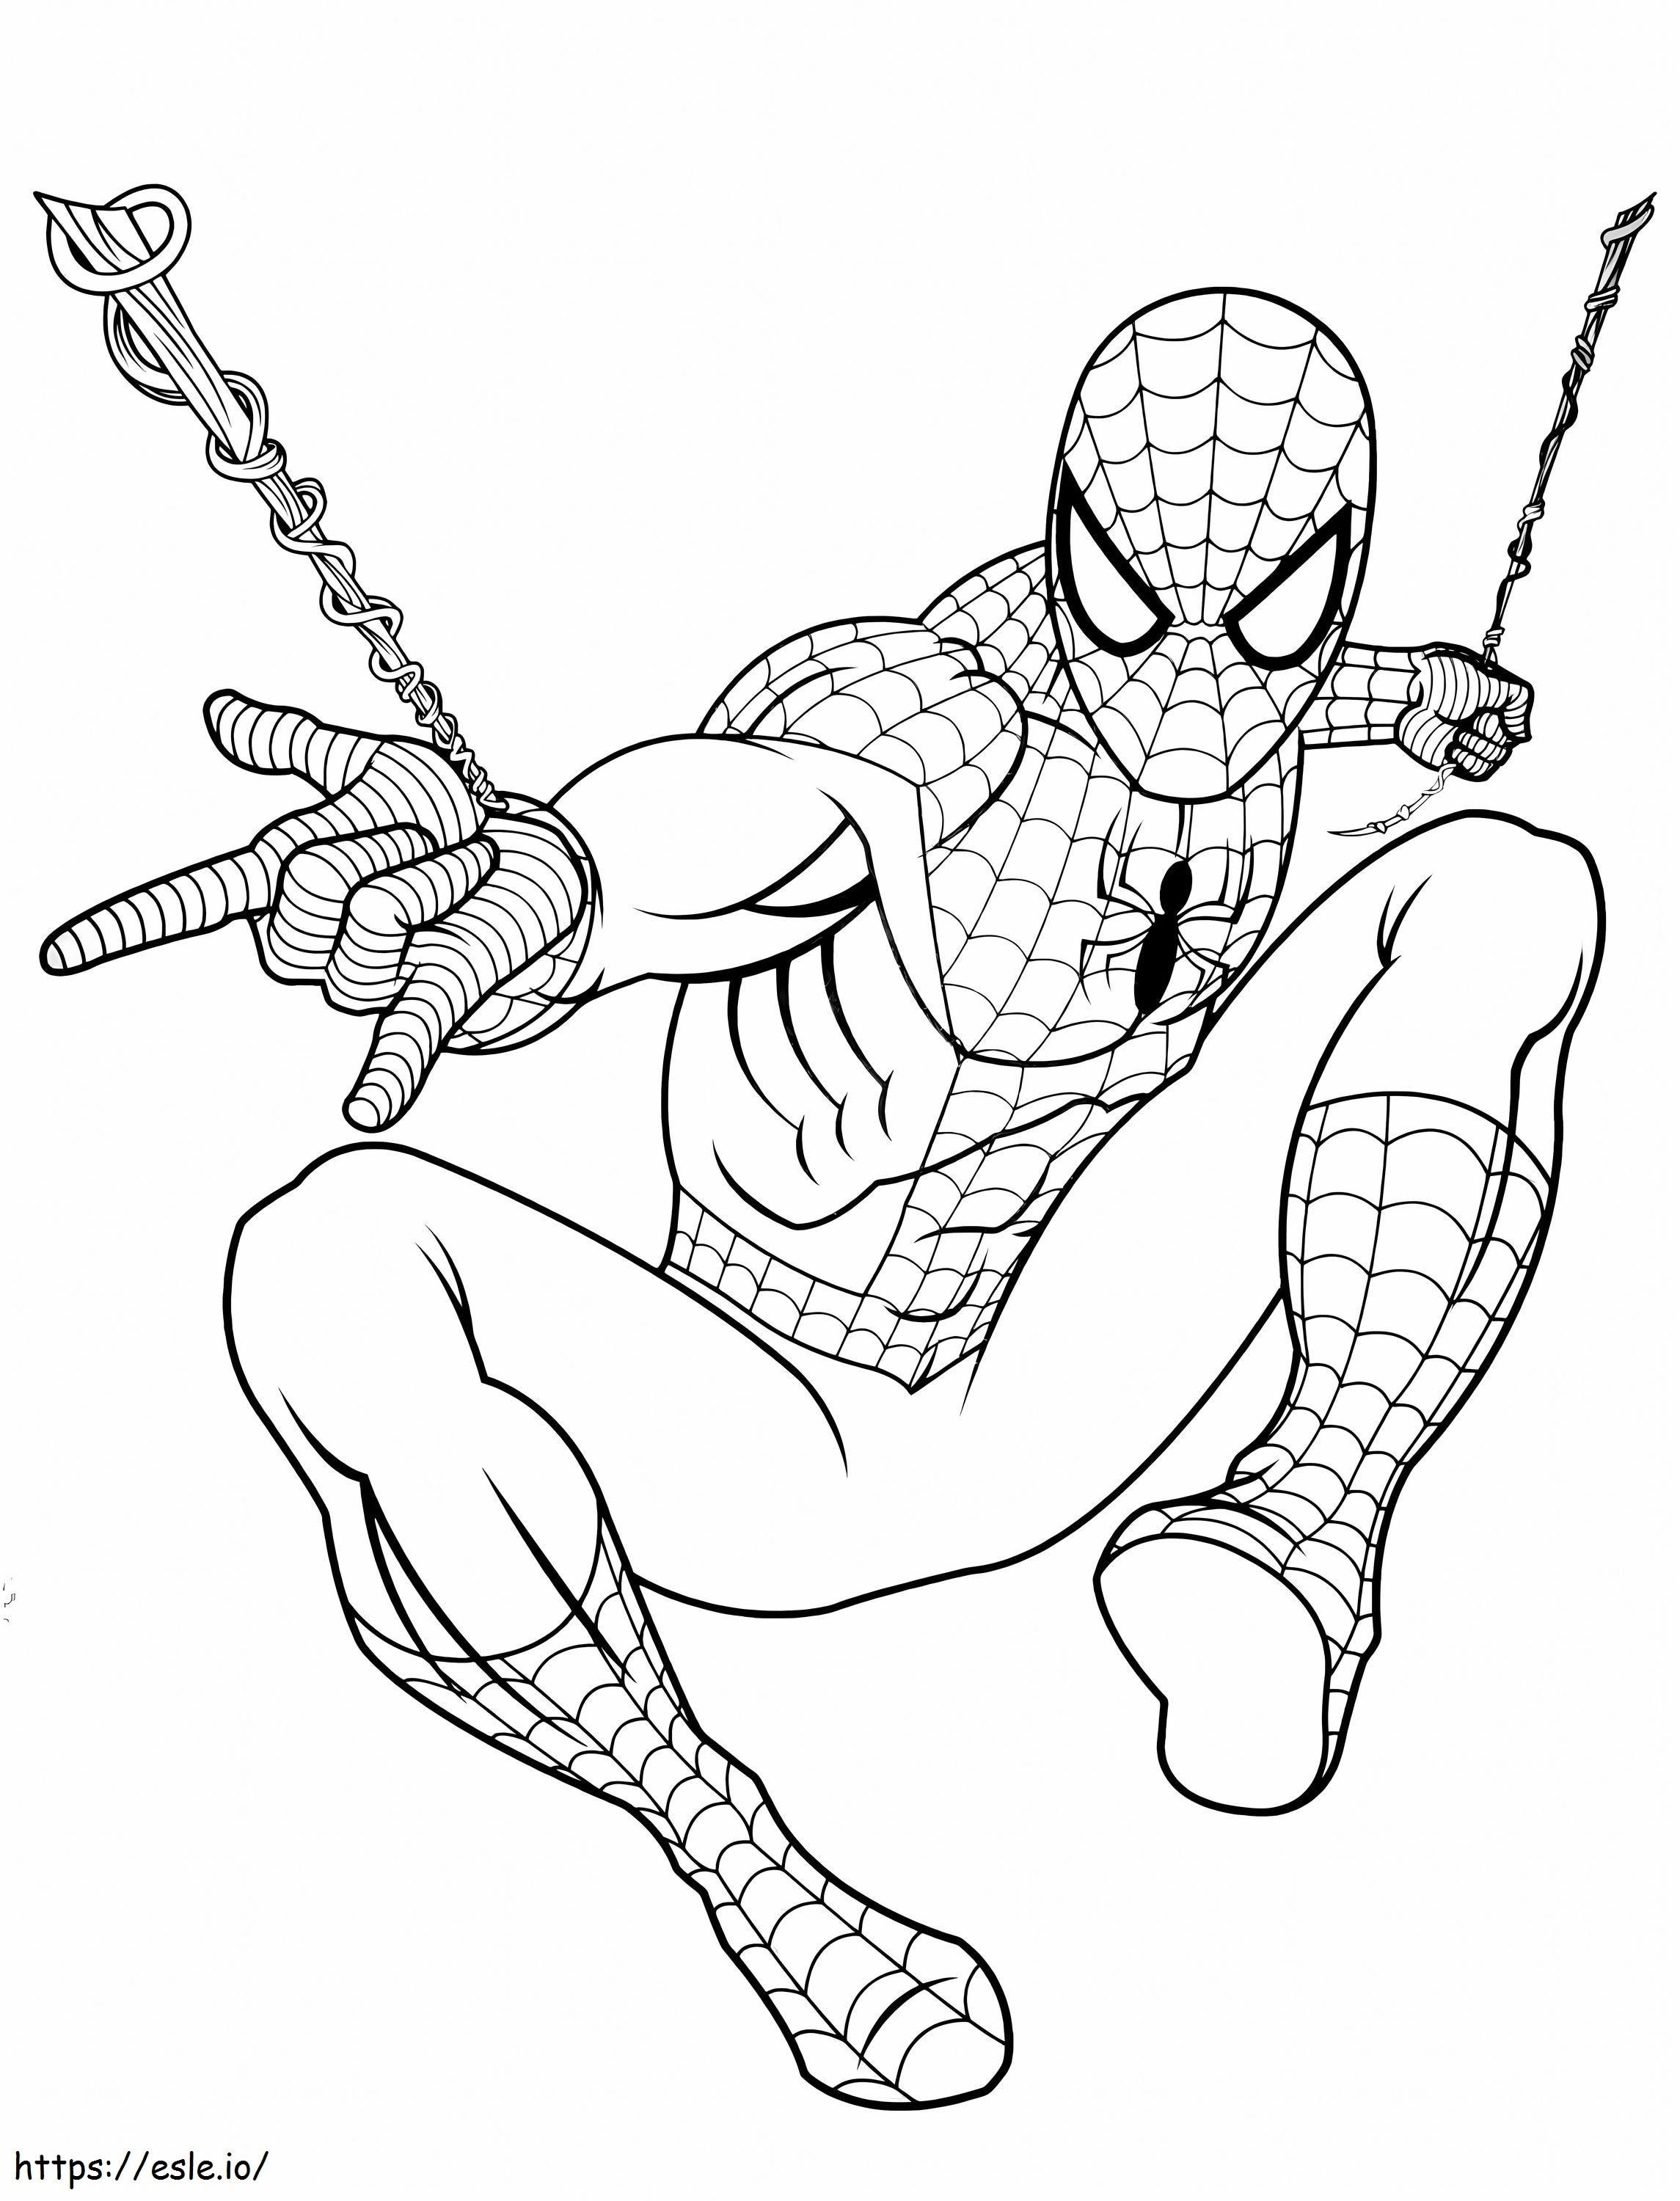 Awesome Spider Man coloring page